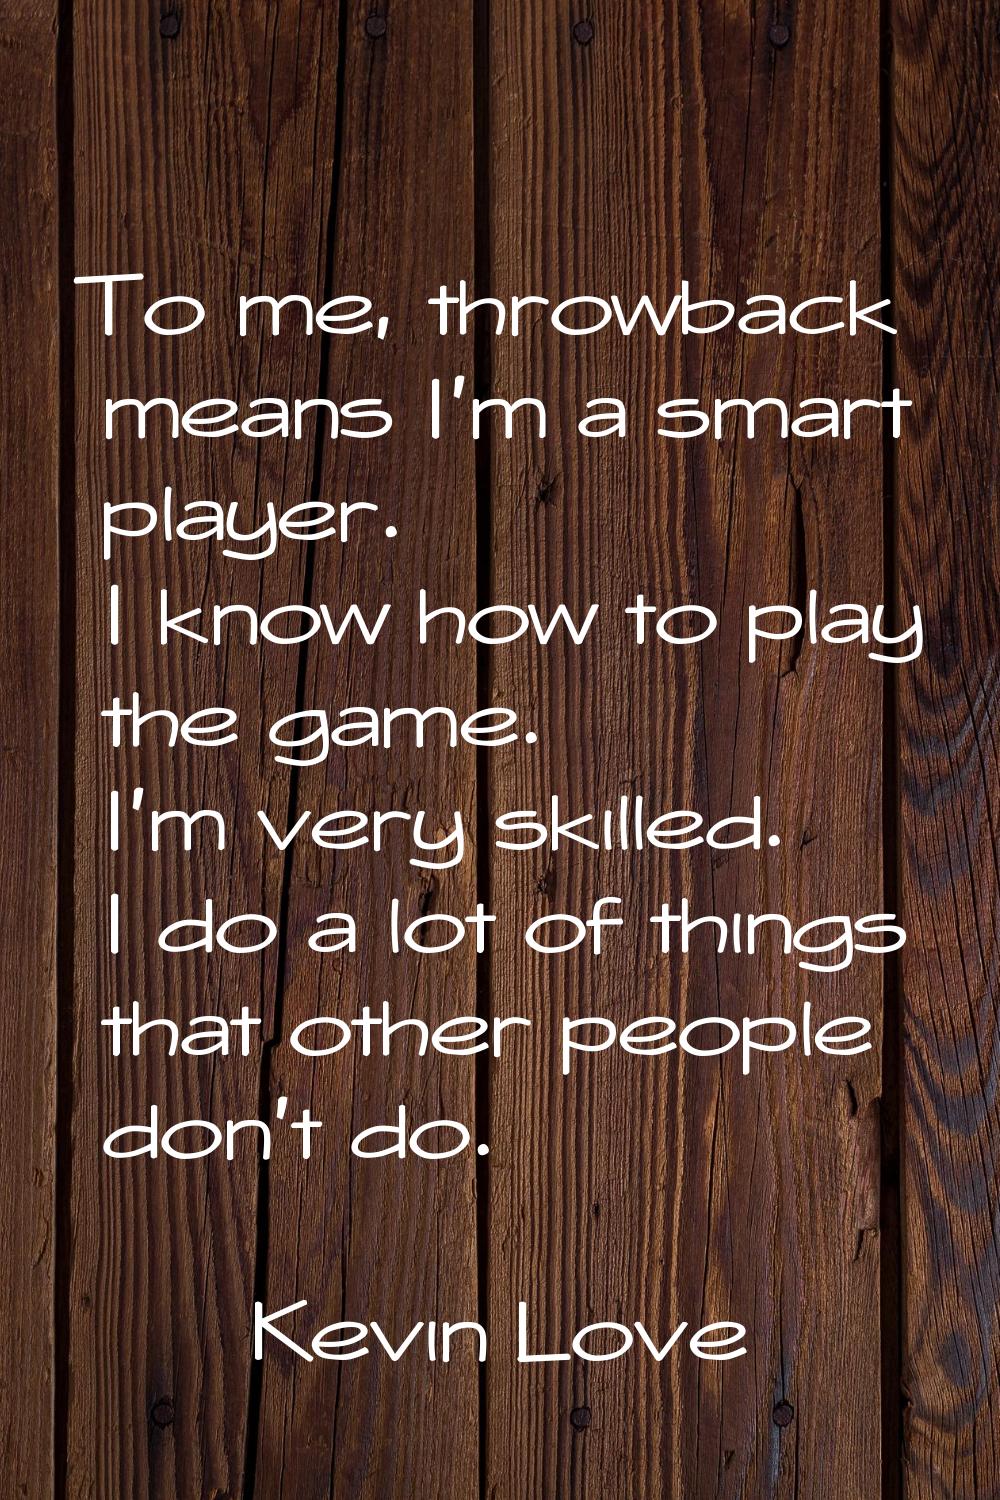 To me, throwback means I'm a smart player. I know how to play the game. I'm very skilled. I do a lo